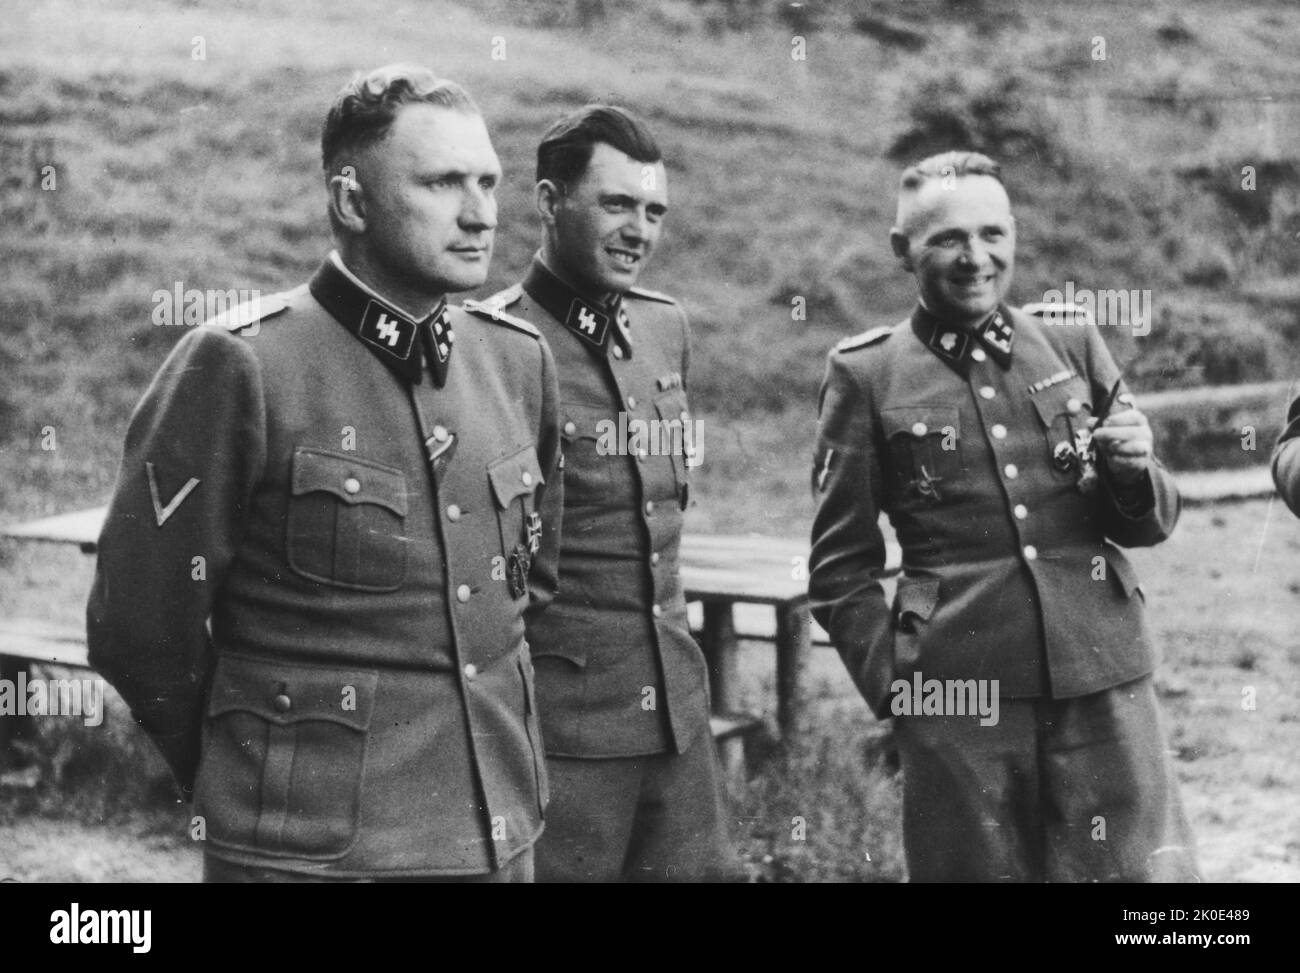 Auschwitz, Poland. Three SS officers socialize on the grounds of the SS retreat outside of Auschwitz, at 'Solahutte', 1944. From left to right they are: Richard Baer (Commandant of Auschwitz), Dr. Josef Mengele and Rudolf Hoess (the former Auschwitz Commandant). Stock Photo